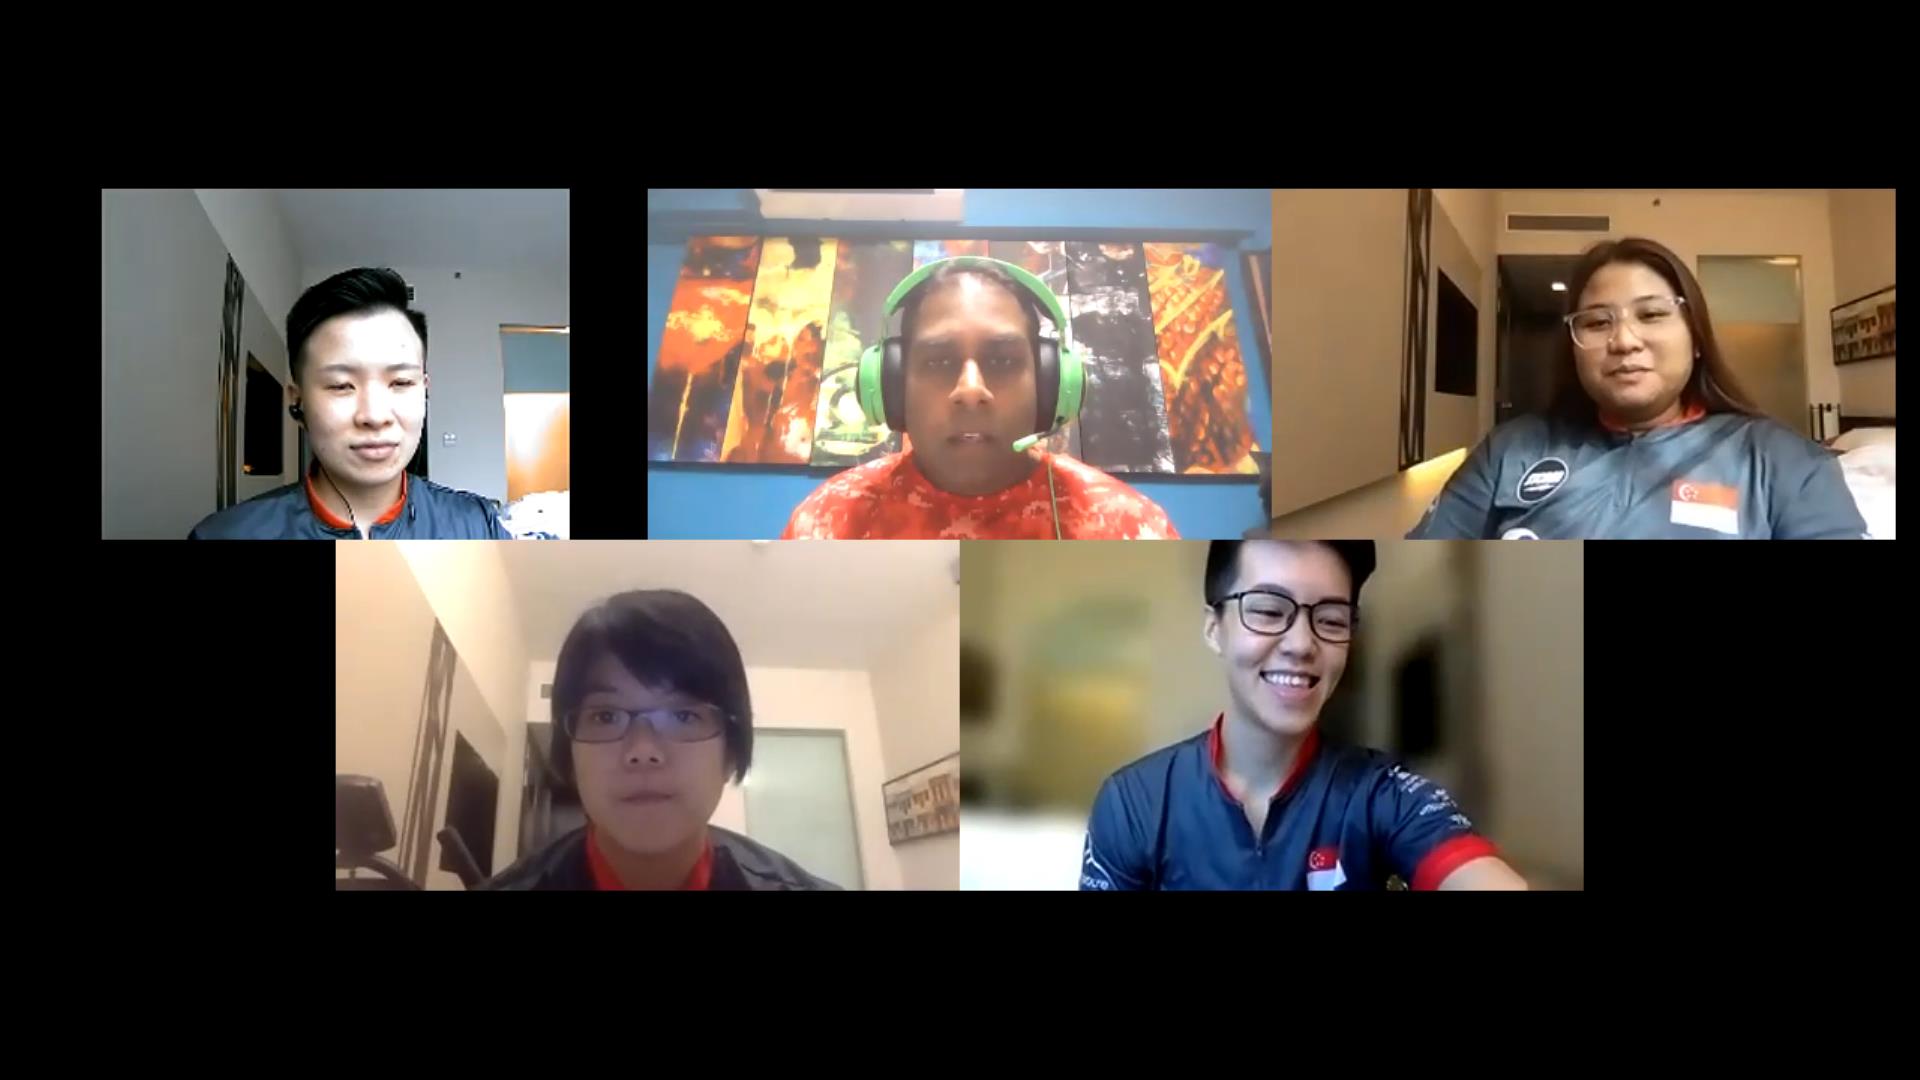 1-on-1 discussion with Singapore's Women's National Bowling Team, after an astonishing overall performance at the 2021 IBF Super World Championships!